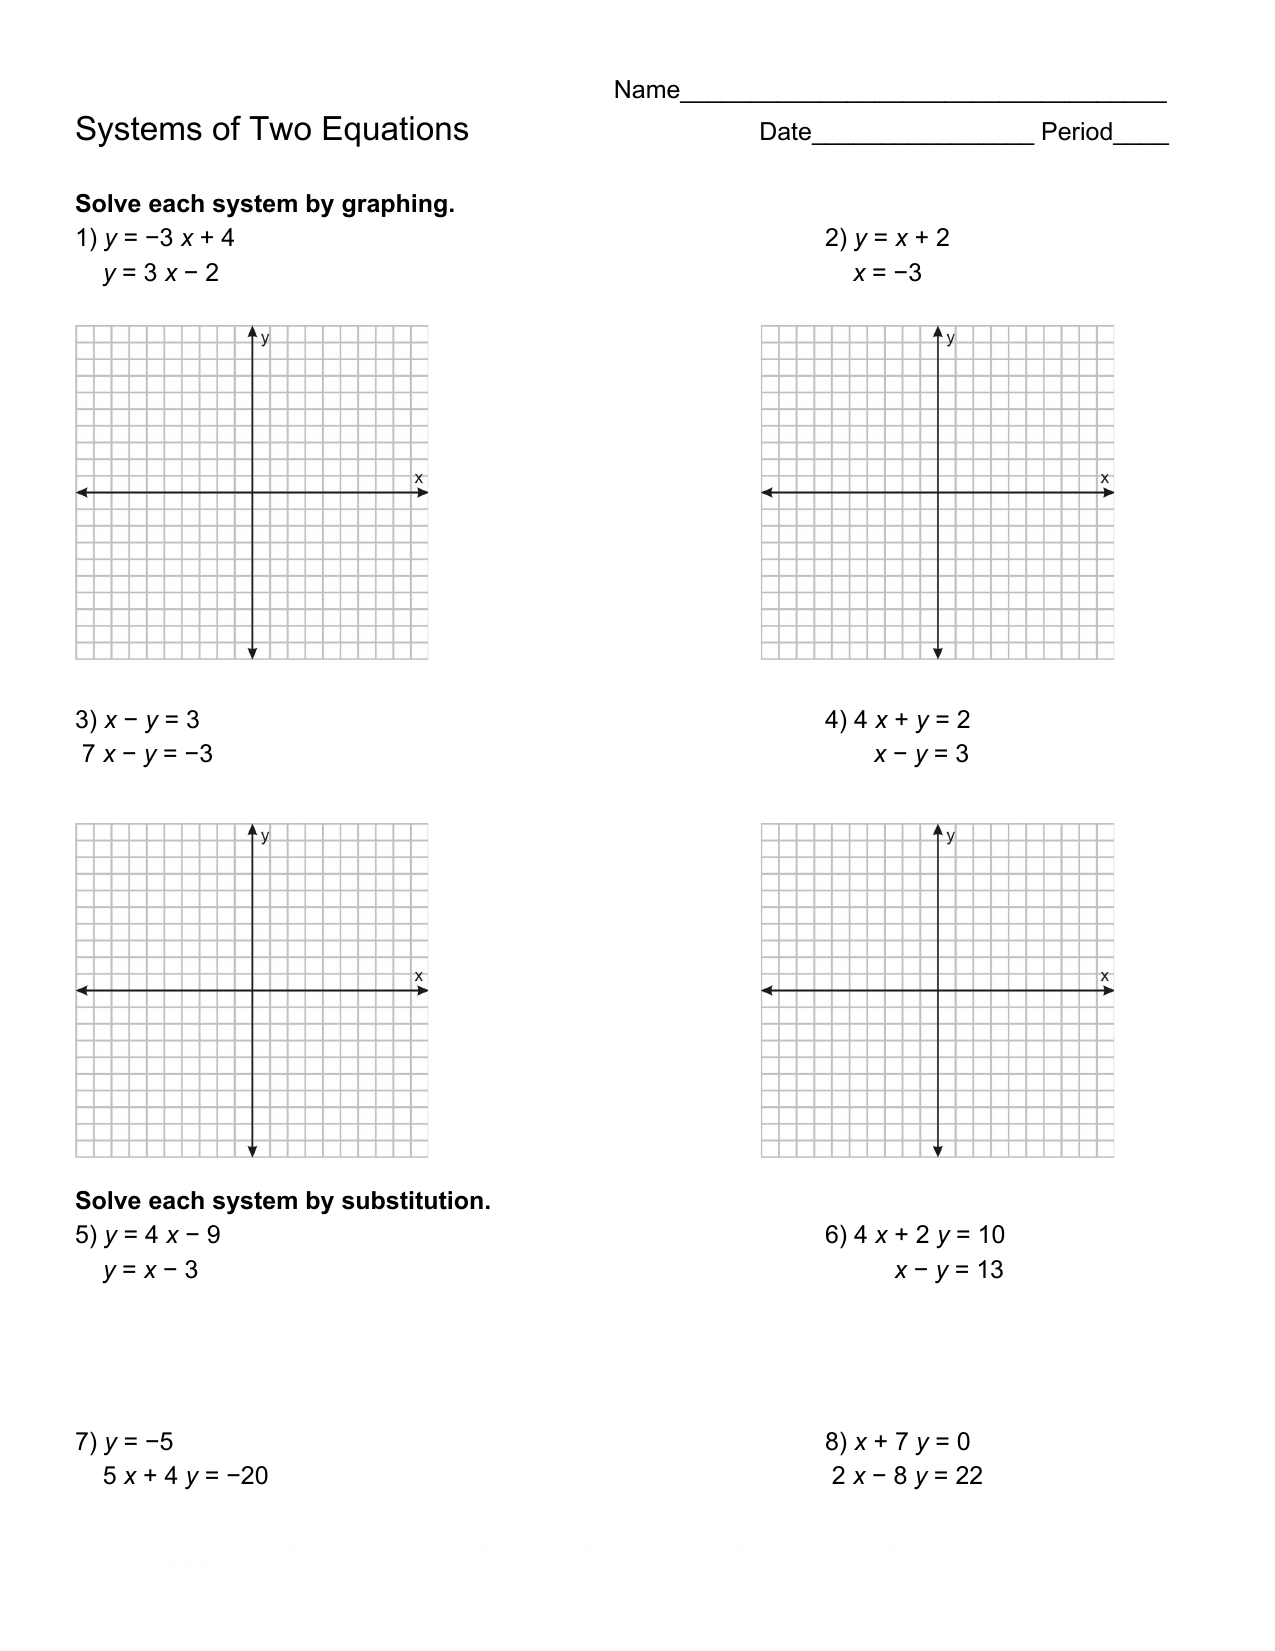 Systems of Two Equations With Solving Systems By Graphing Worksheet